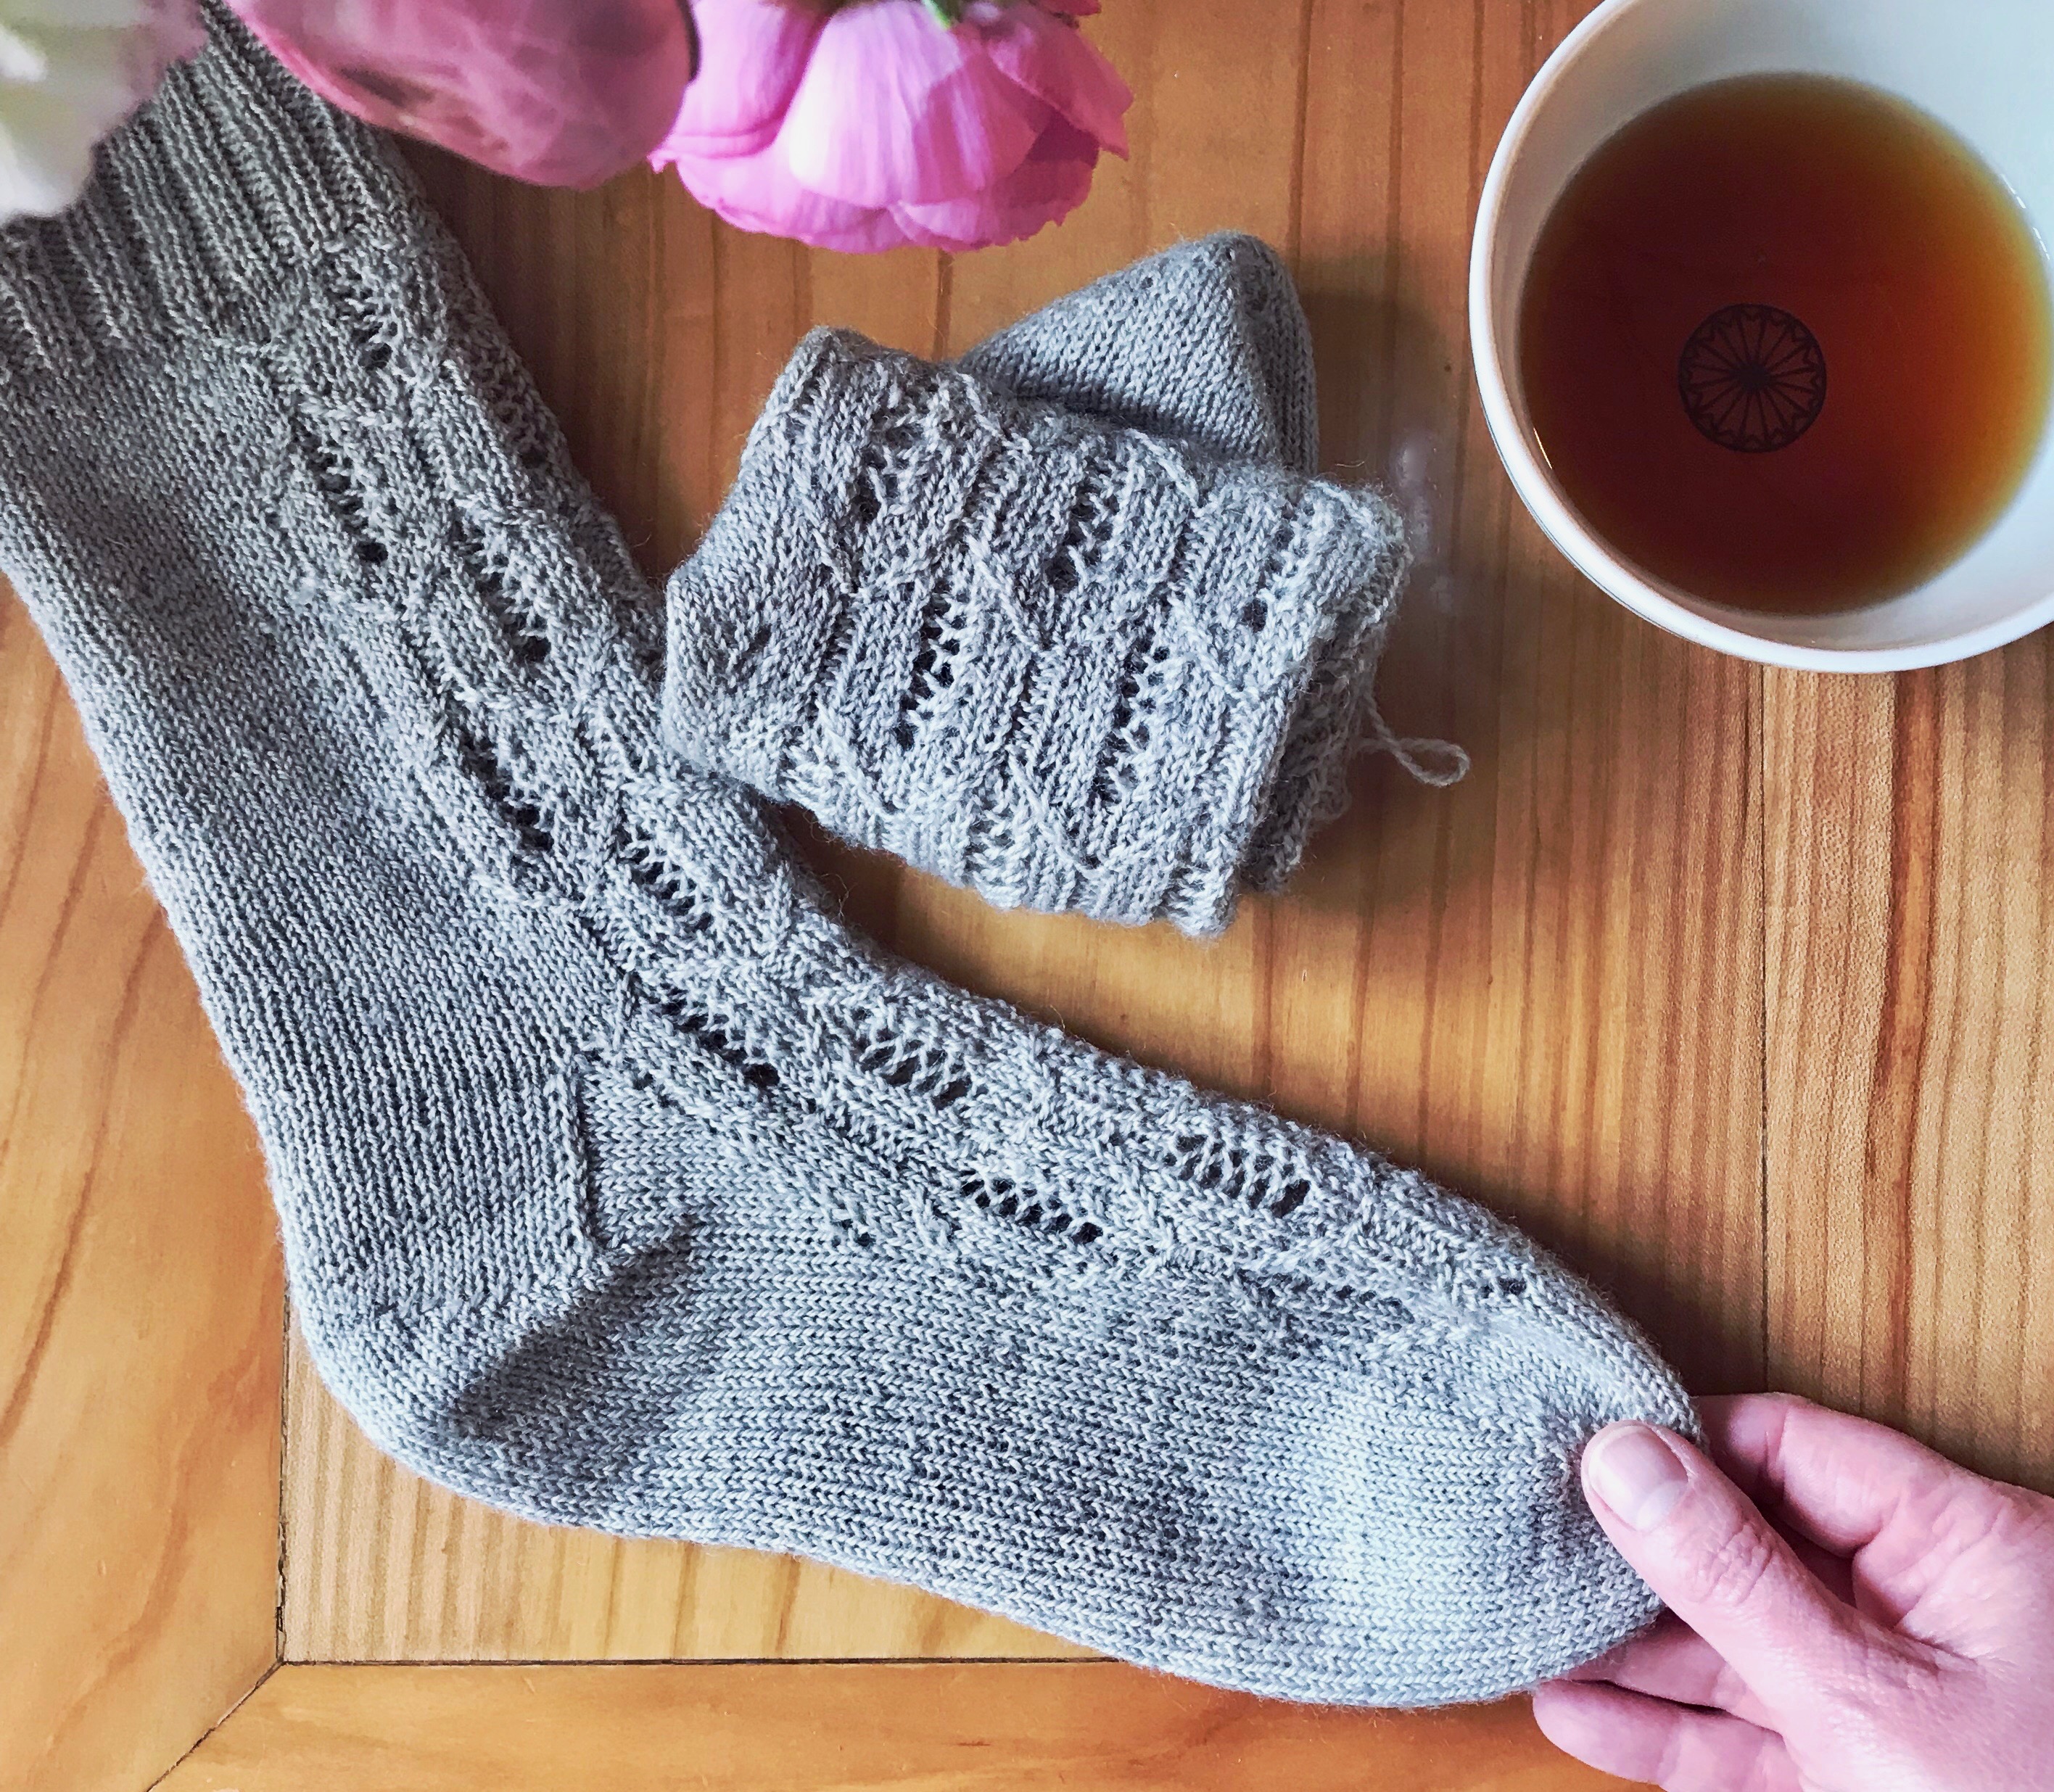 Flatlay of Morningside socks with a cup of tea and roses.